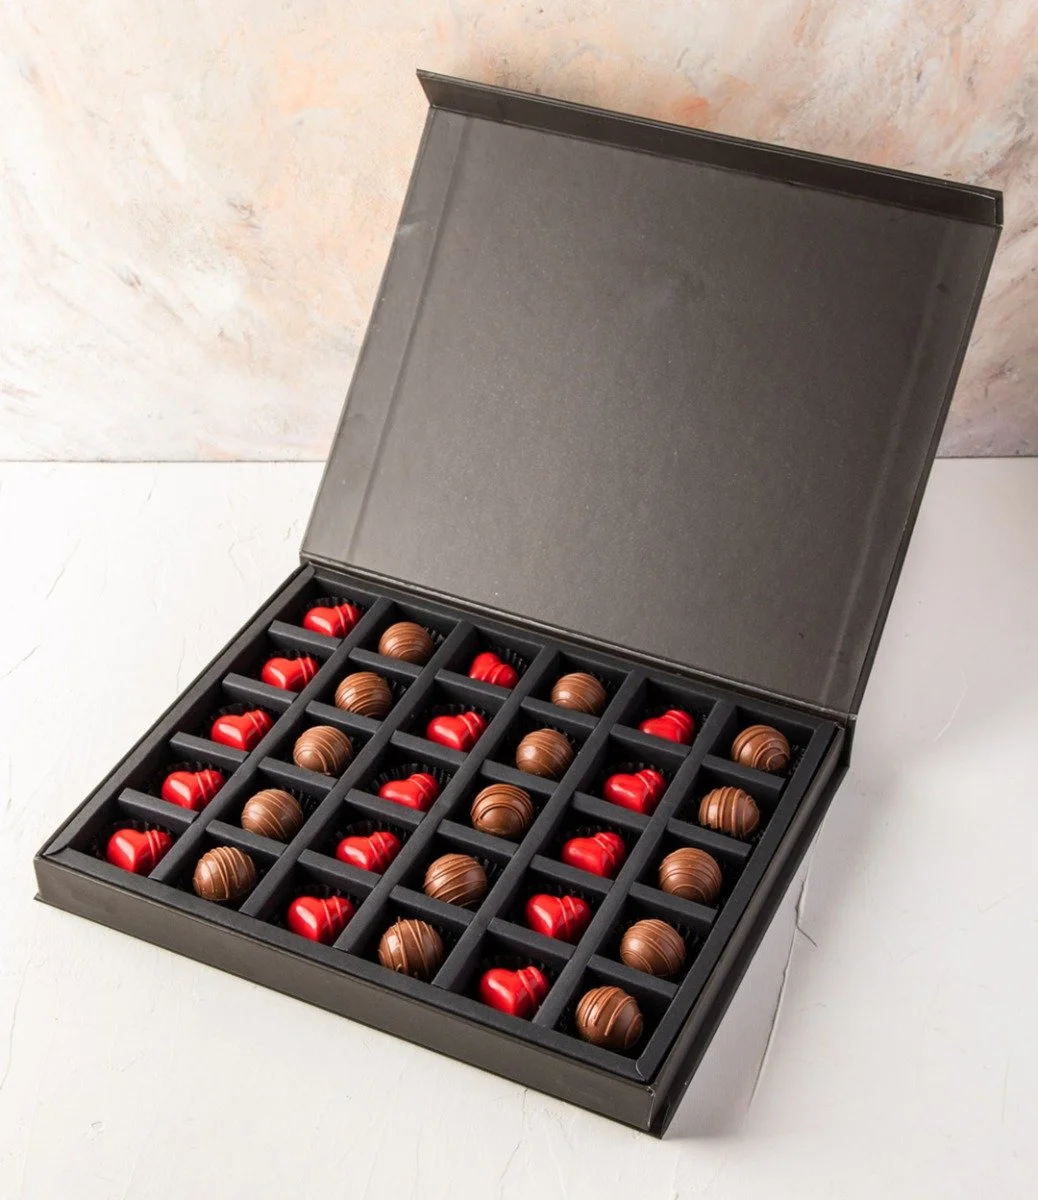 Truffles and Pralines by NJD